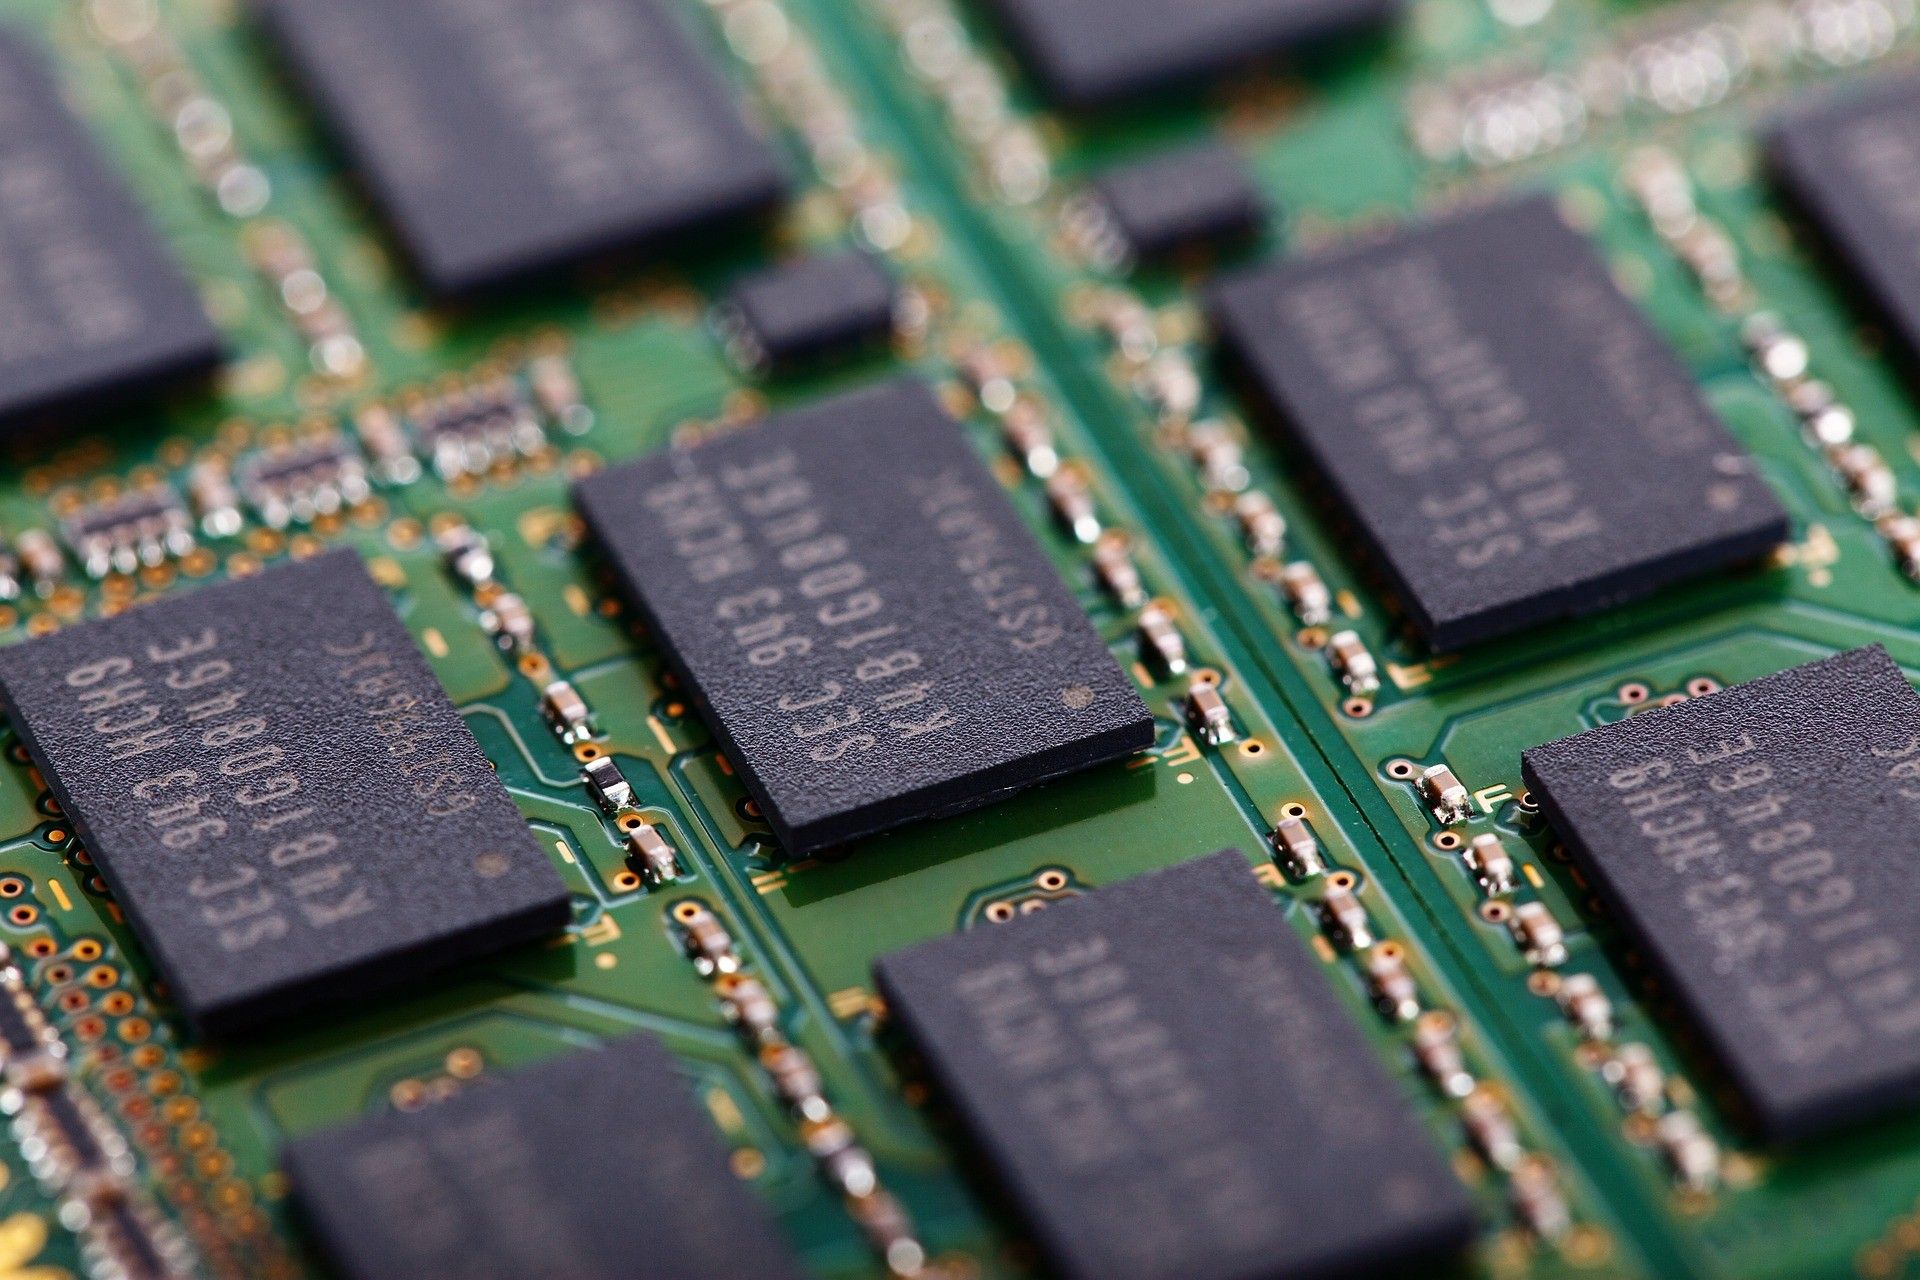 A close up view of embedded RAM